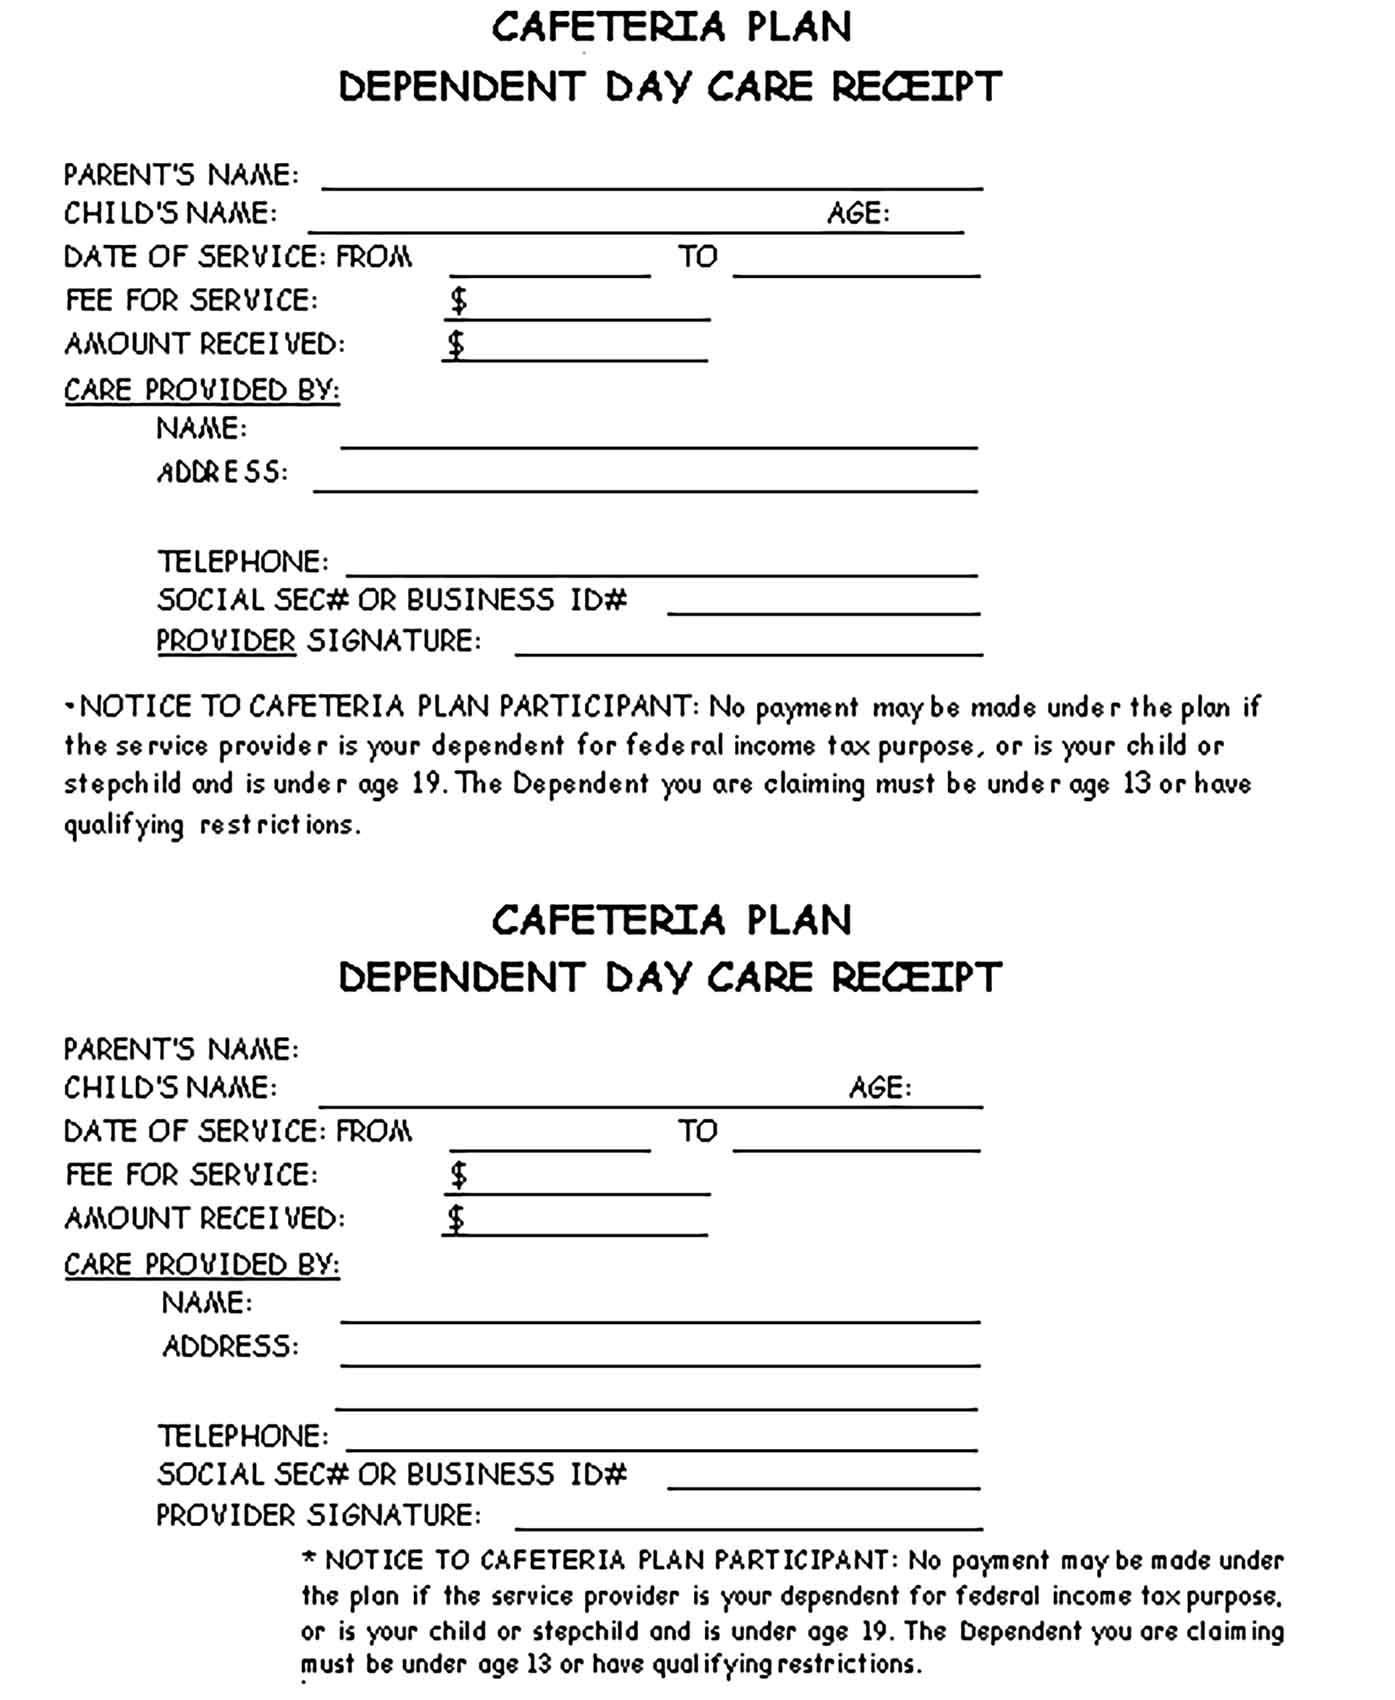 Sample Dependent Day Care Receipt Templates